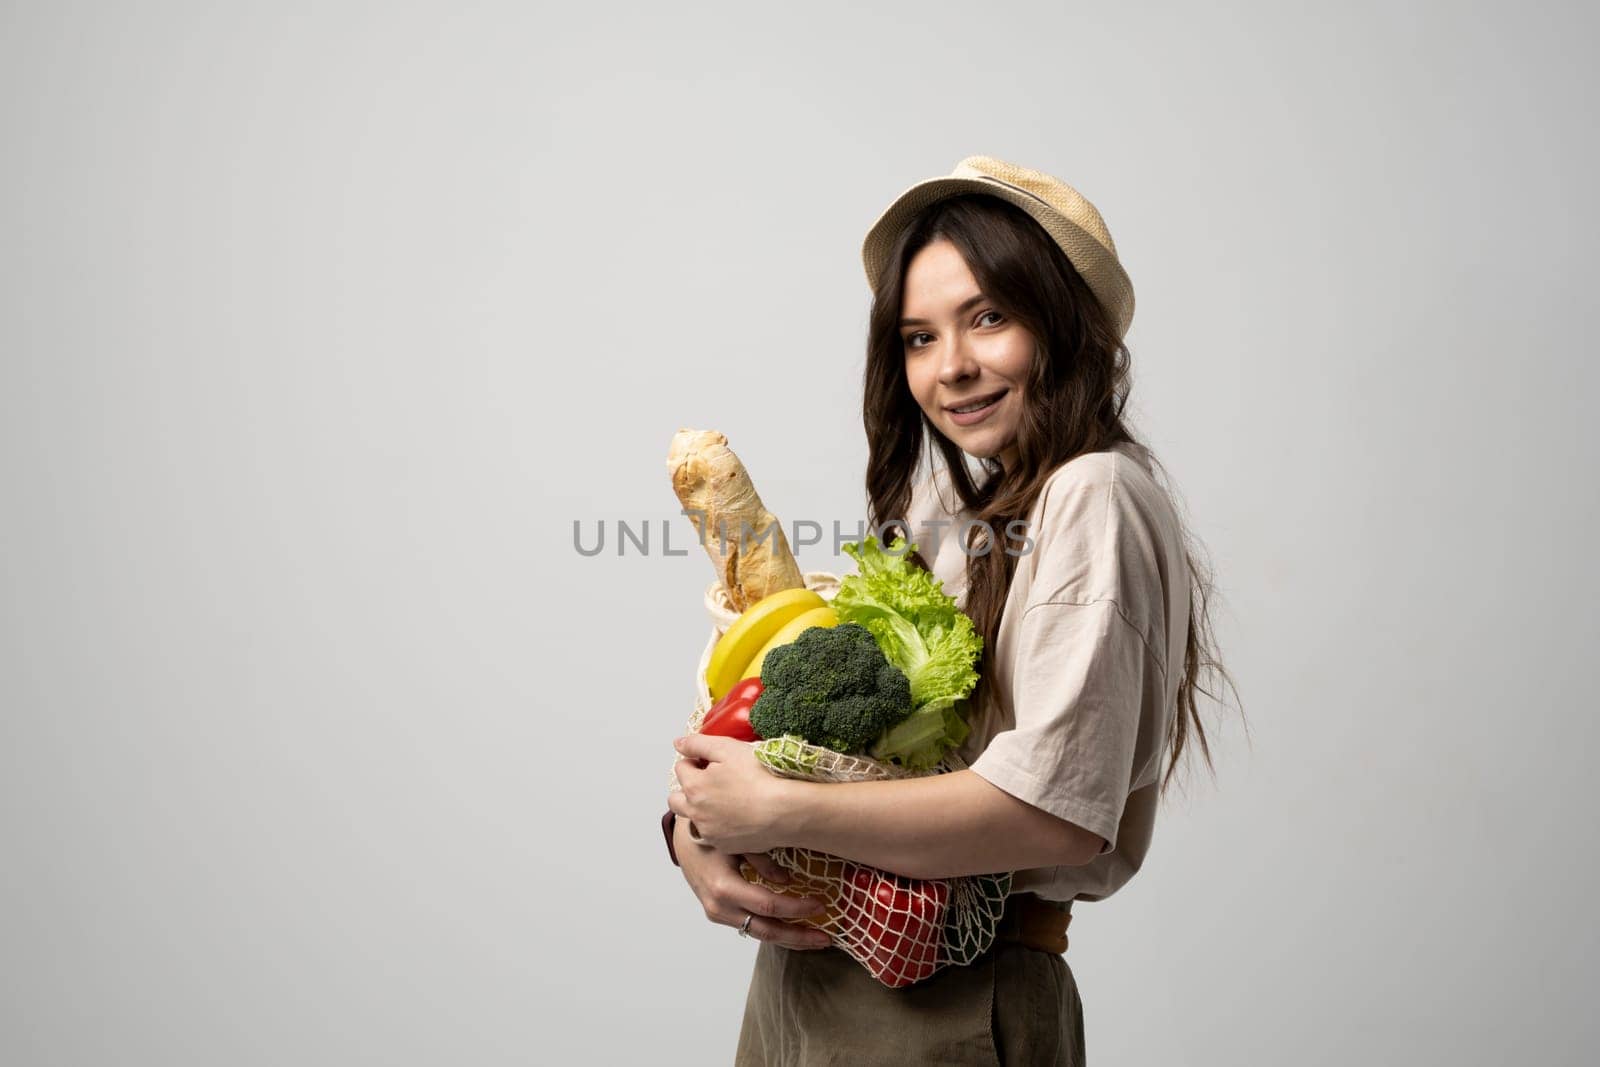 Portrait of happy smiling young woman in beige oversize t-shirt holding reusable string bag with groceries over white background. Sustainability, eco living and people concept. by vovsht